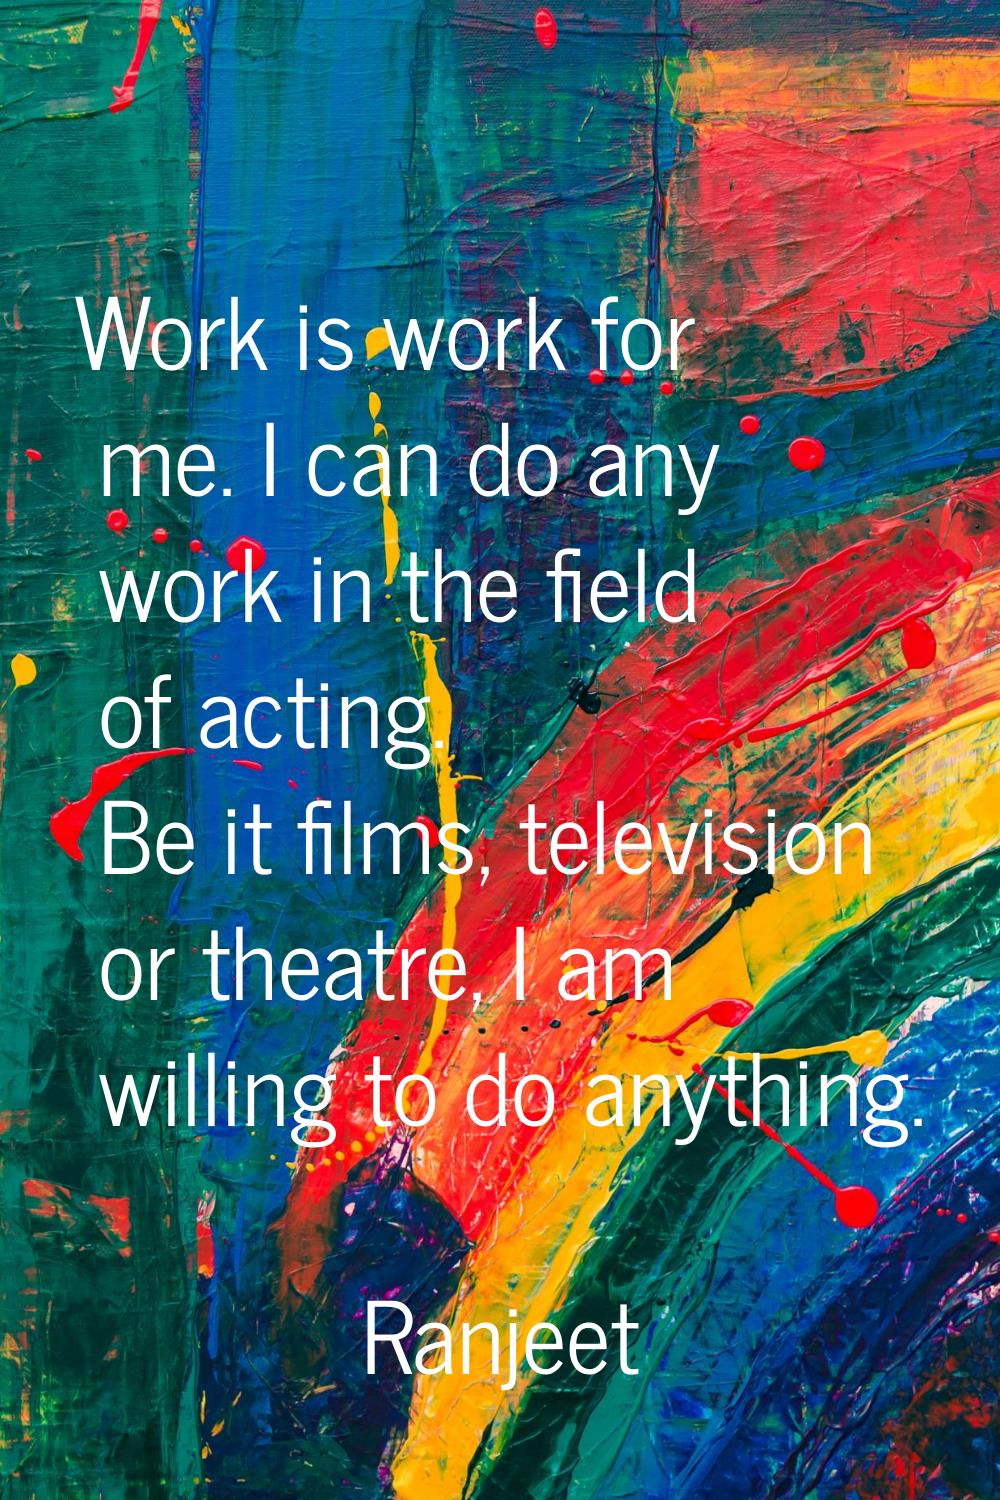 Work is work for me. I can do any work in the field of acting. Be it films, television or theatre, 